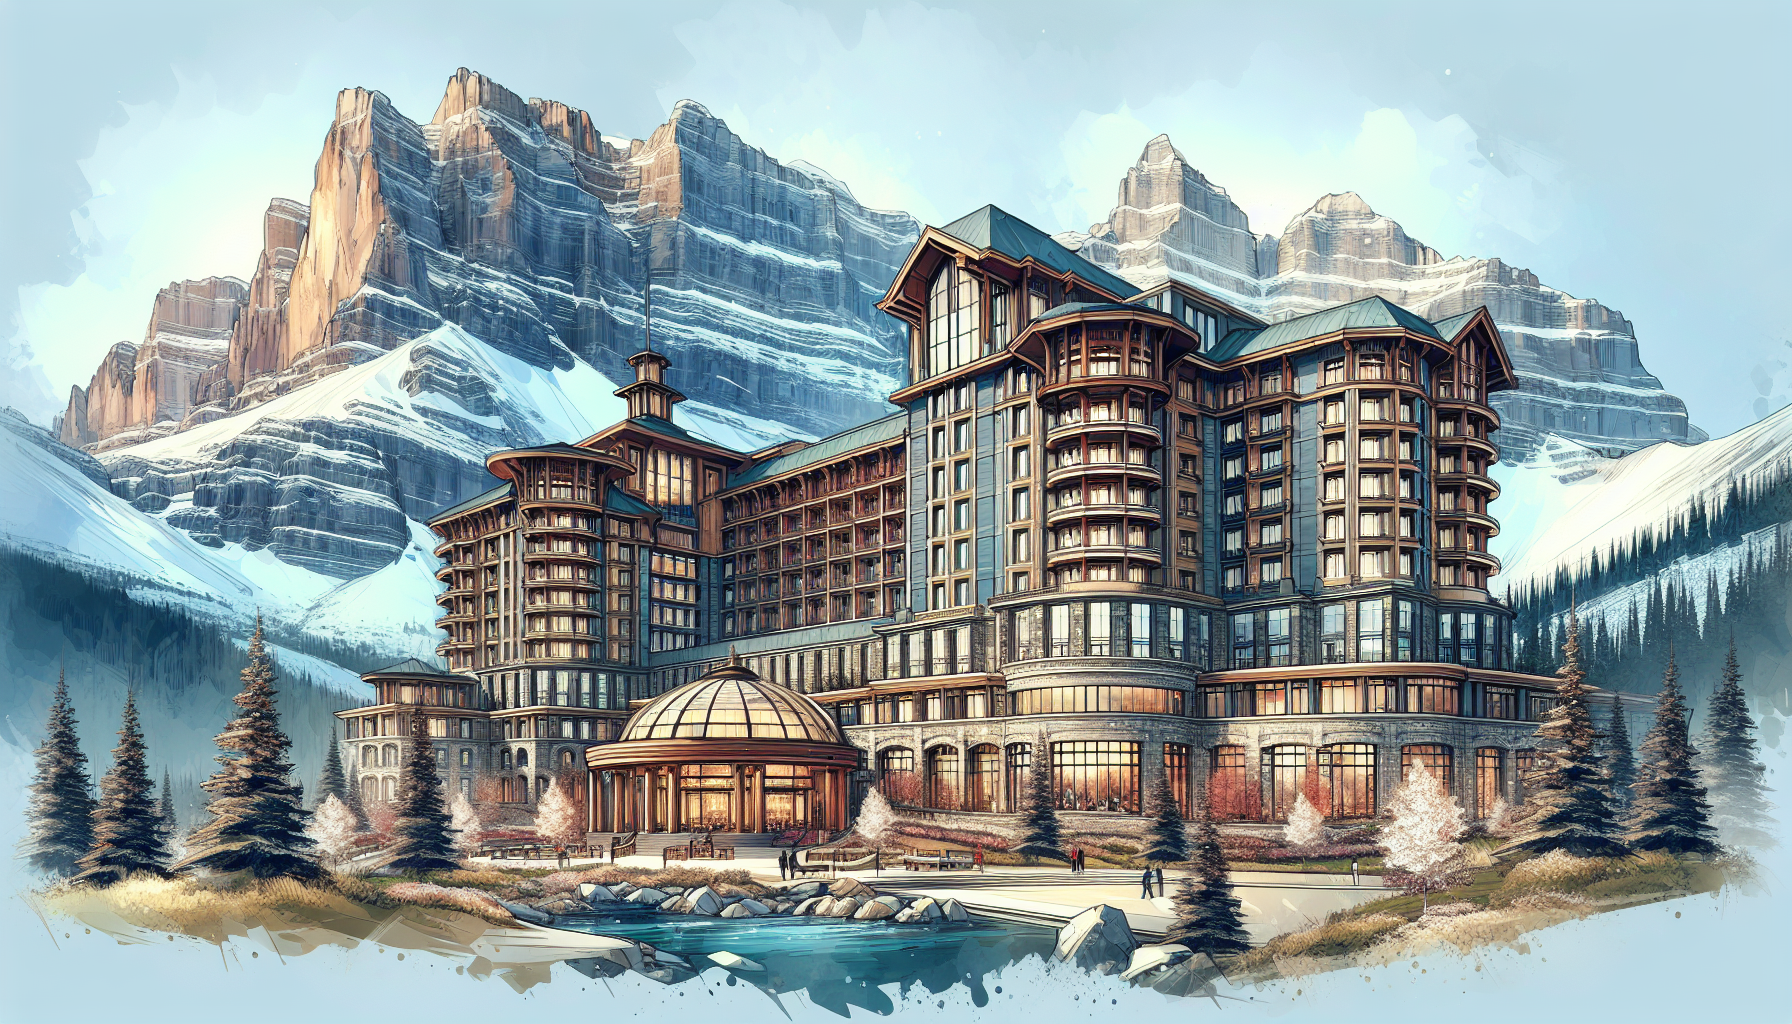 How Many Rooms Are In The Gaylord Rockies?